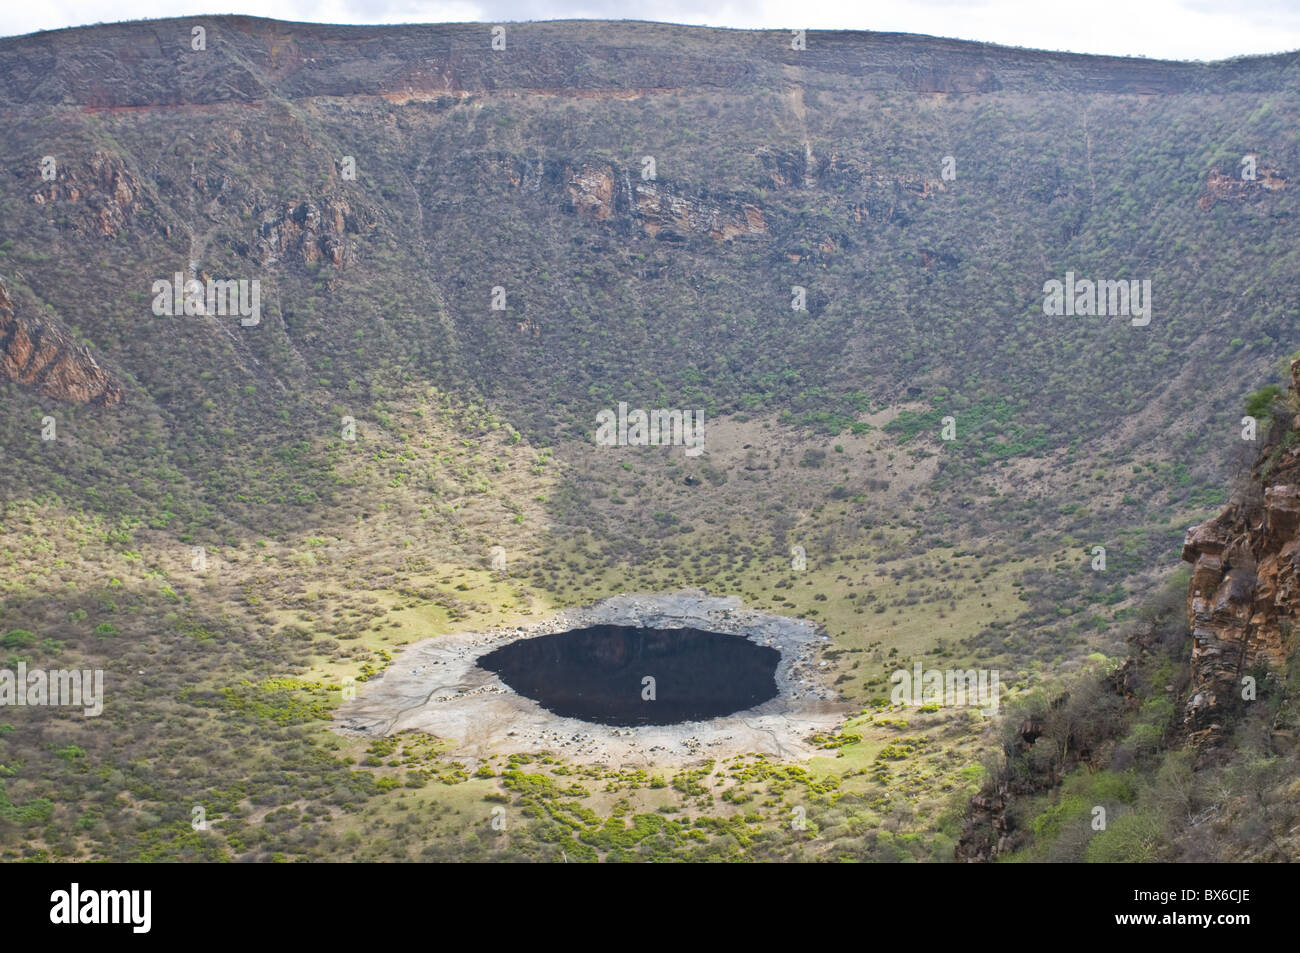 El Sod Crater lake, Southern Ethiopia, Africa Stock Photo